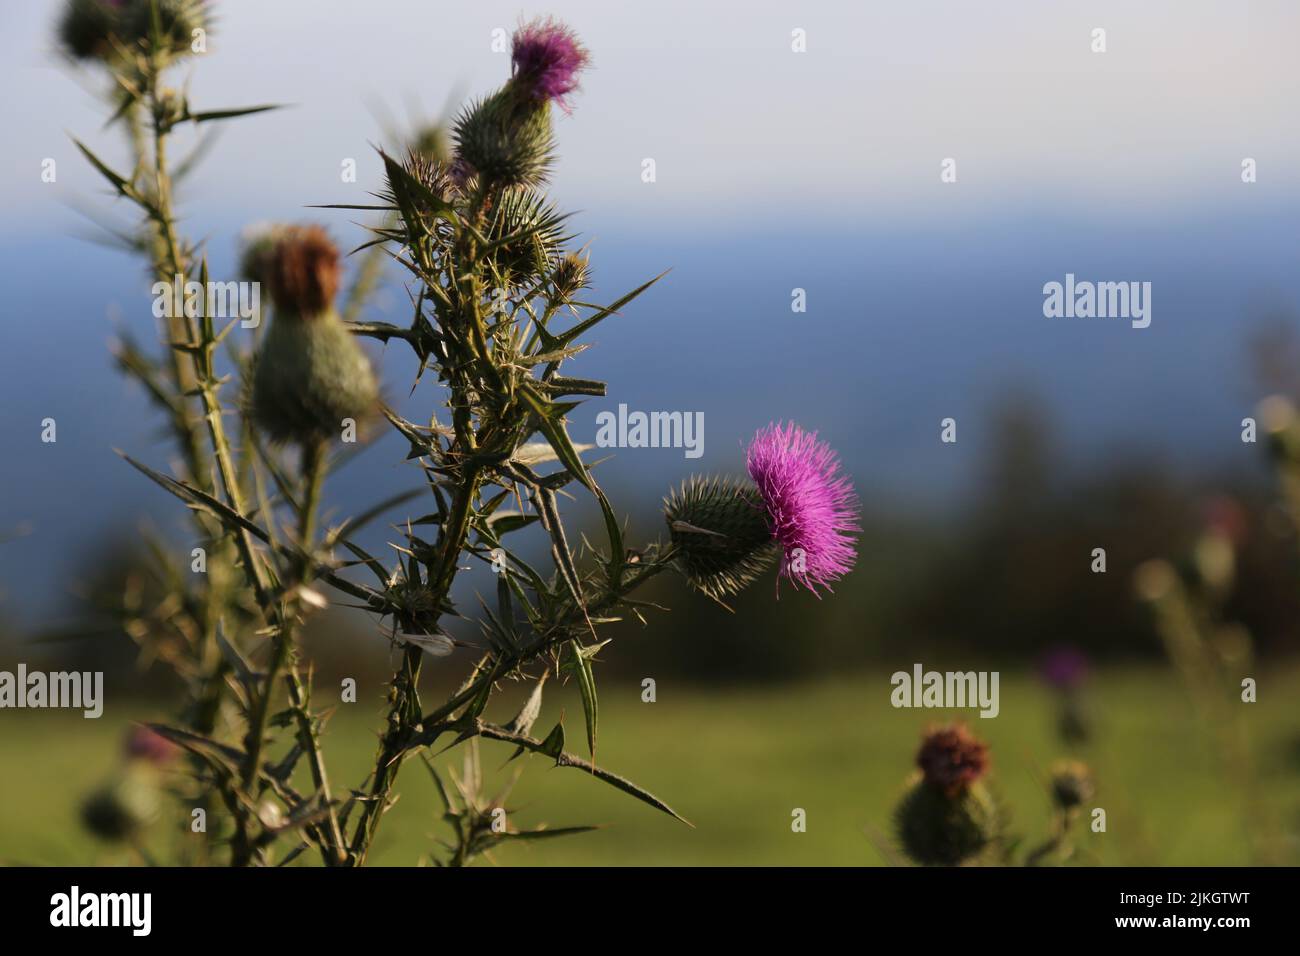 A closeup shot of plumeless thistles on the blurry background Stock Photo